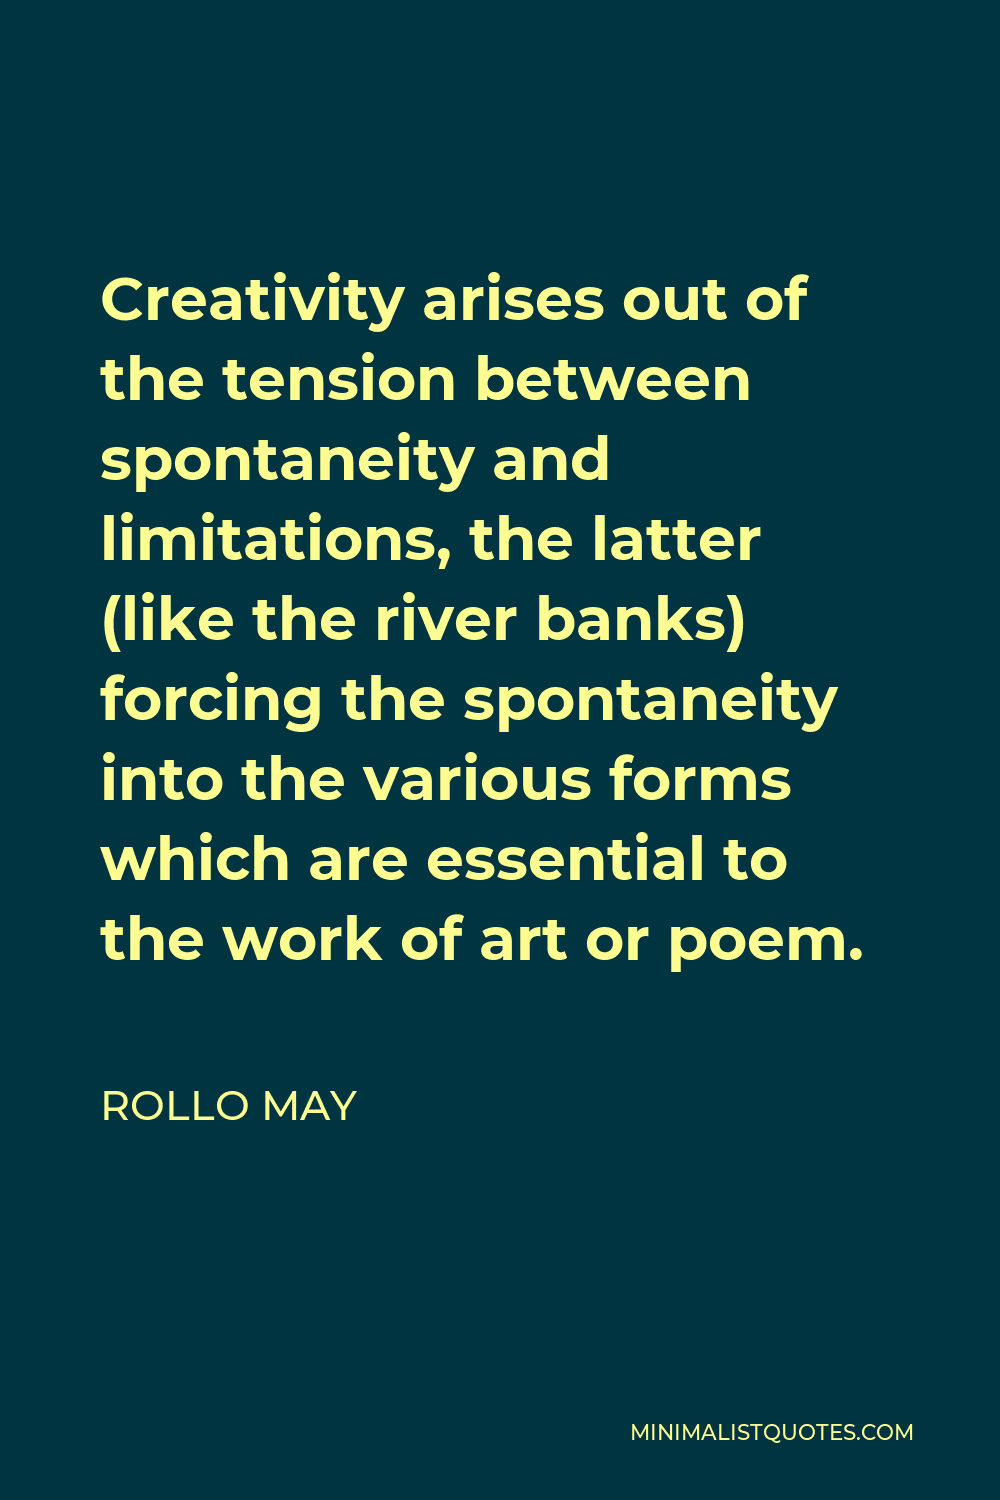 Rollo May Quote - Creativity arises out of the tension between spontaneity and limitations, the latter (like the river banks) forcing the spontaneity into the various forms which are essential to the work of art or poem.